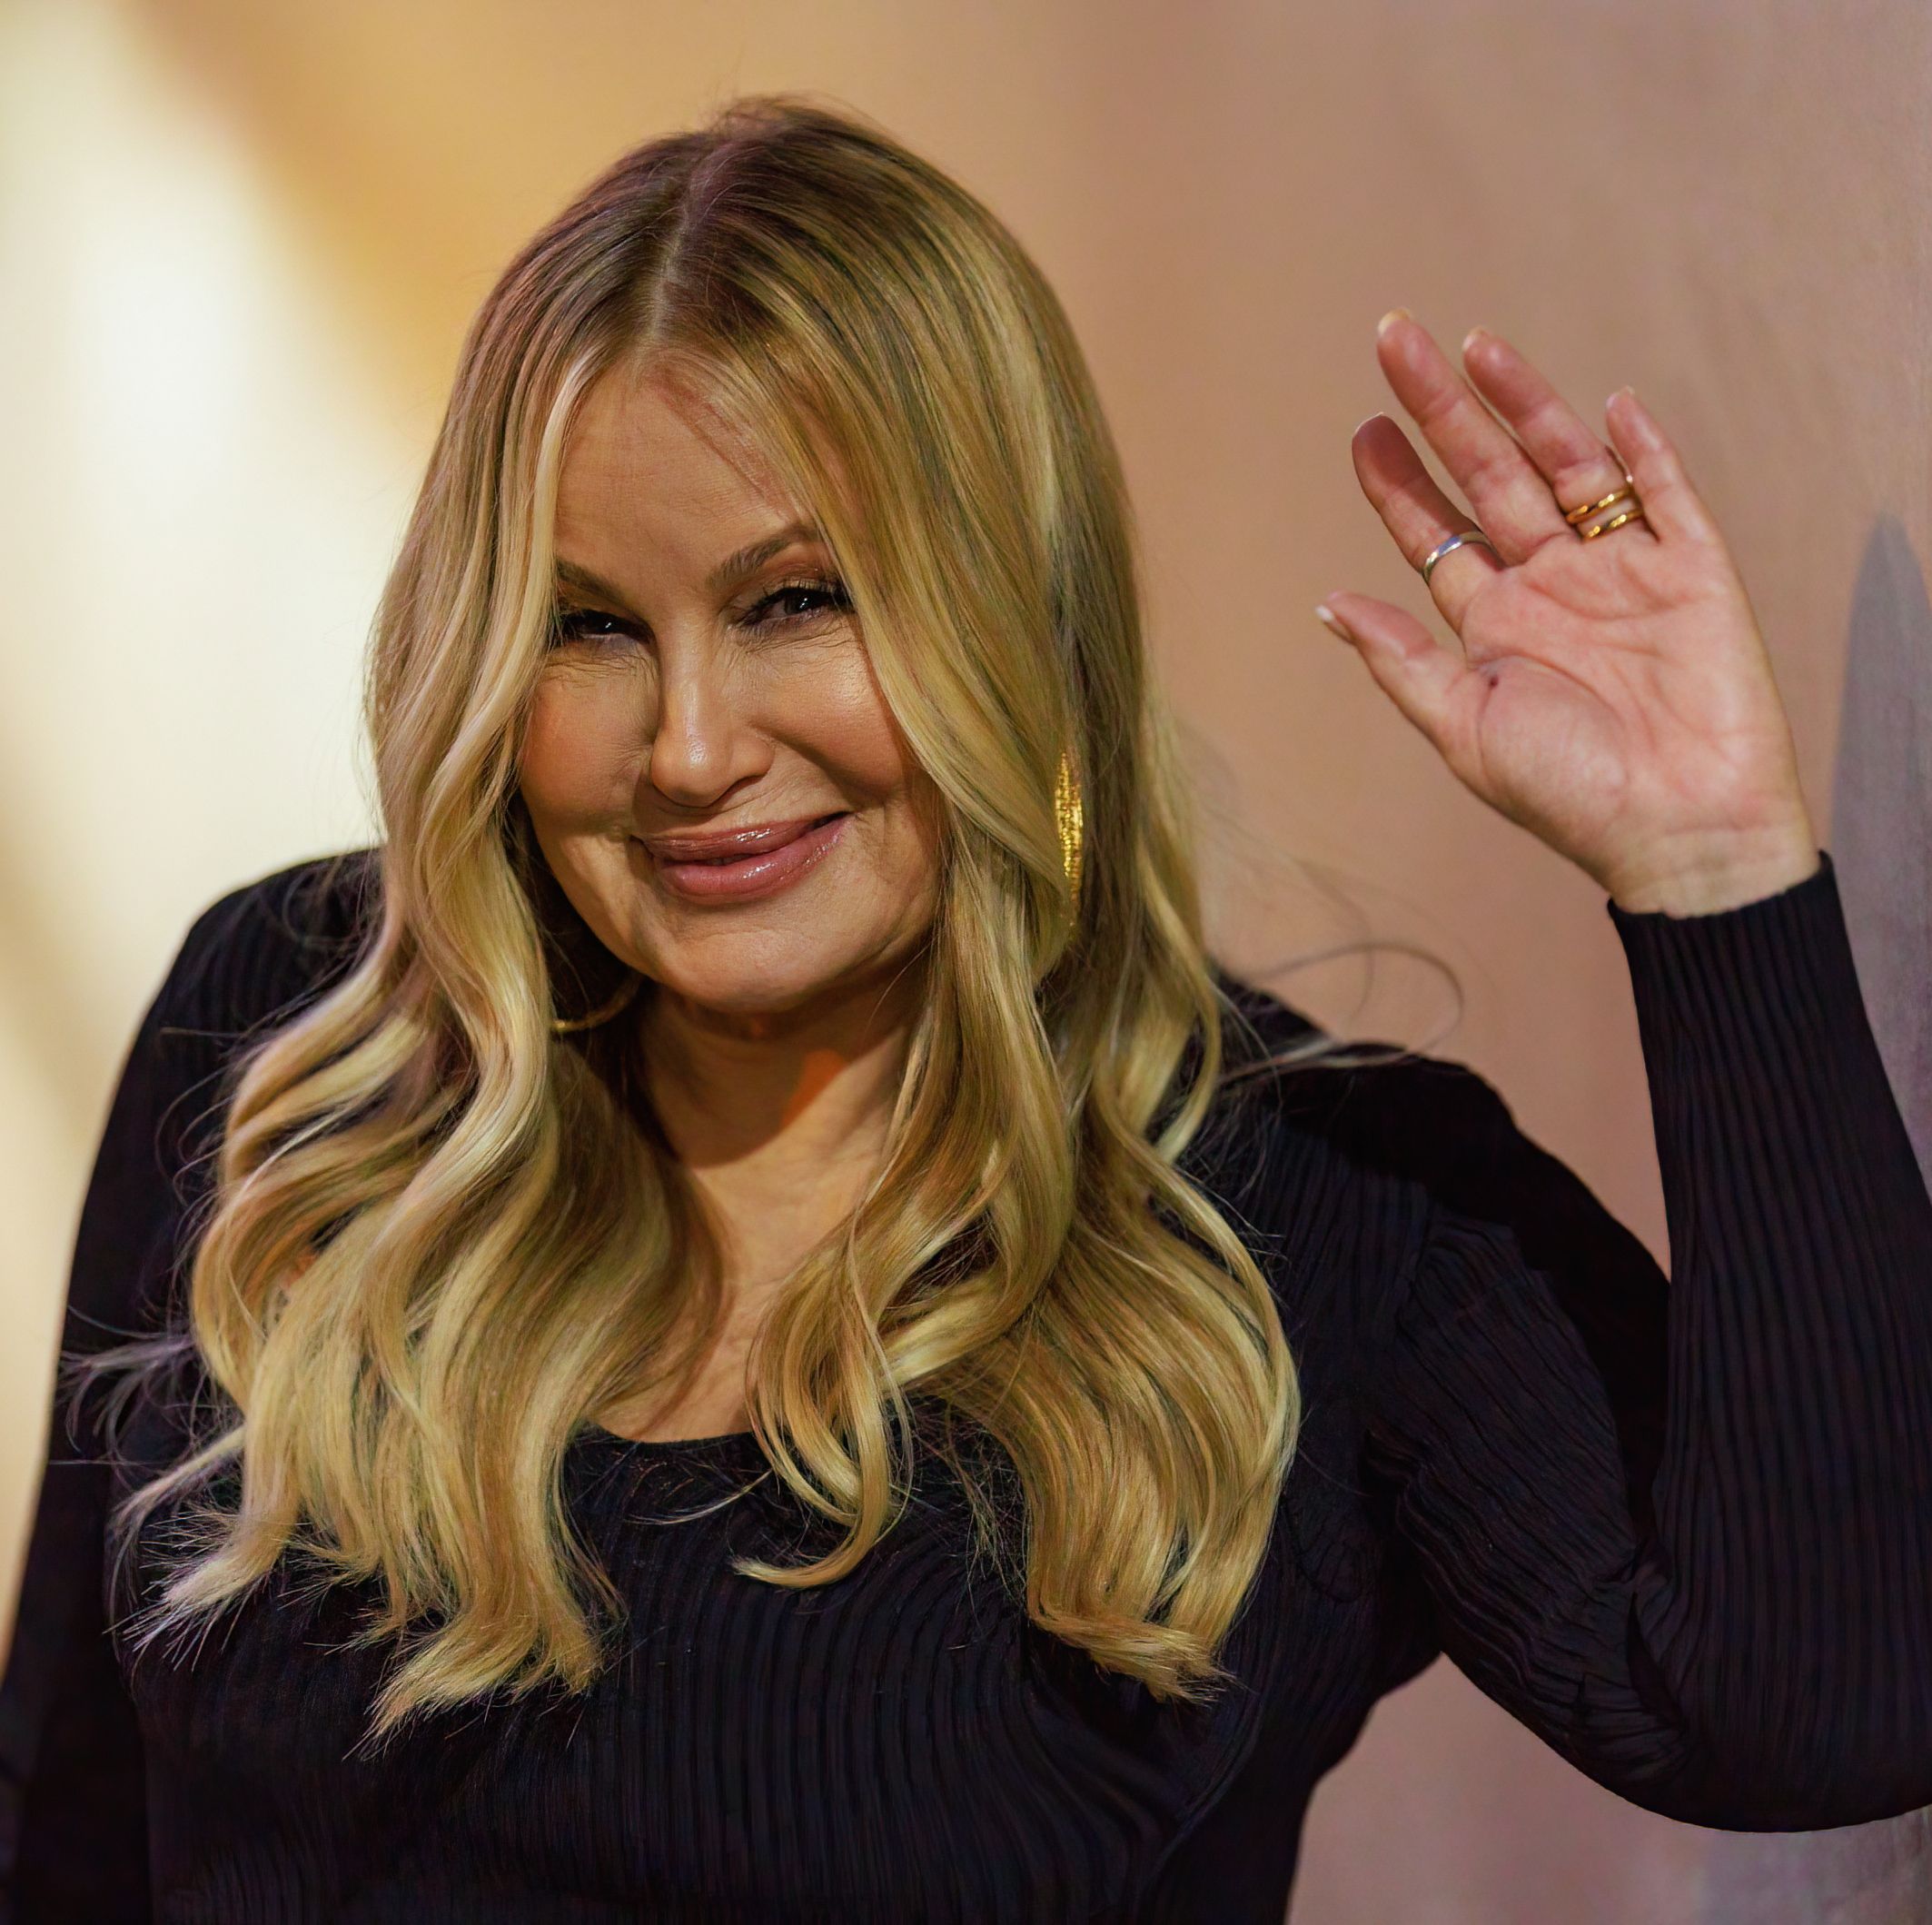 'American Pie' Star Jennifer Coolidge Says She Slept With 200 People After Playing a MILF